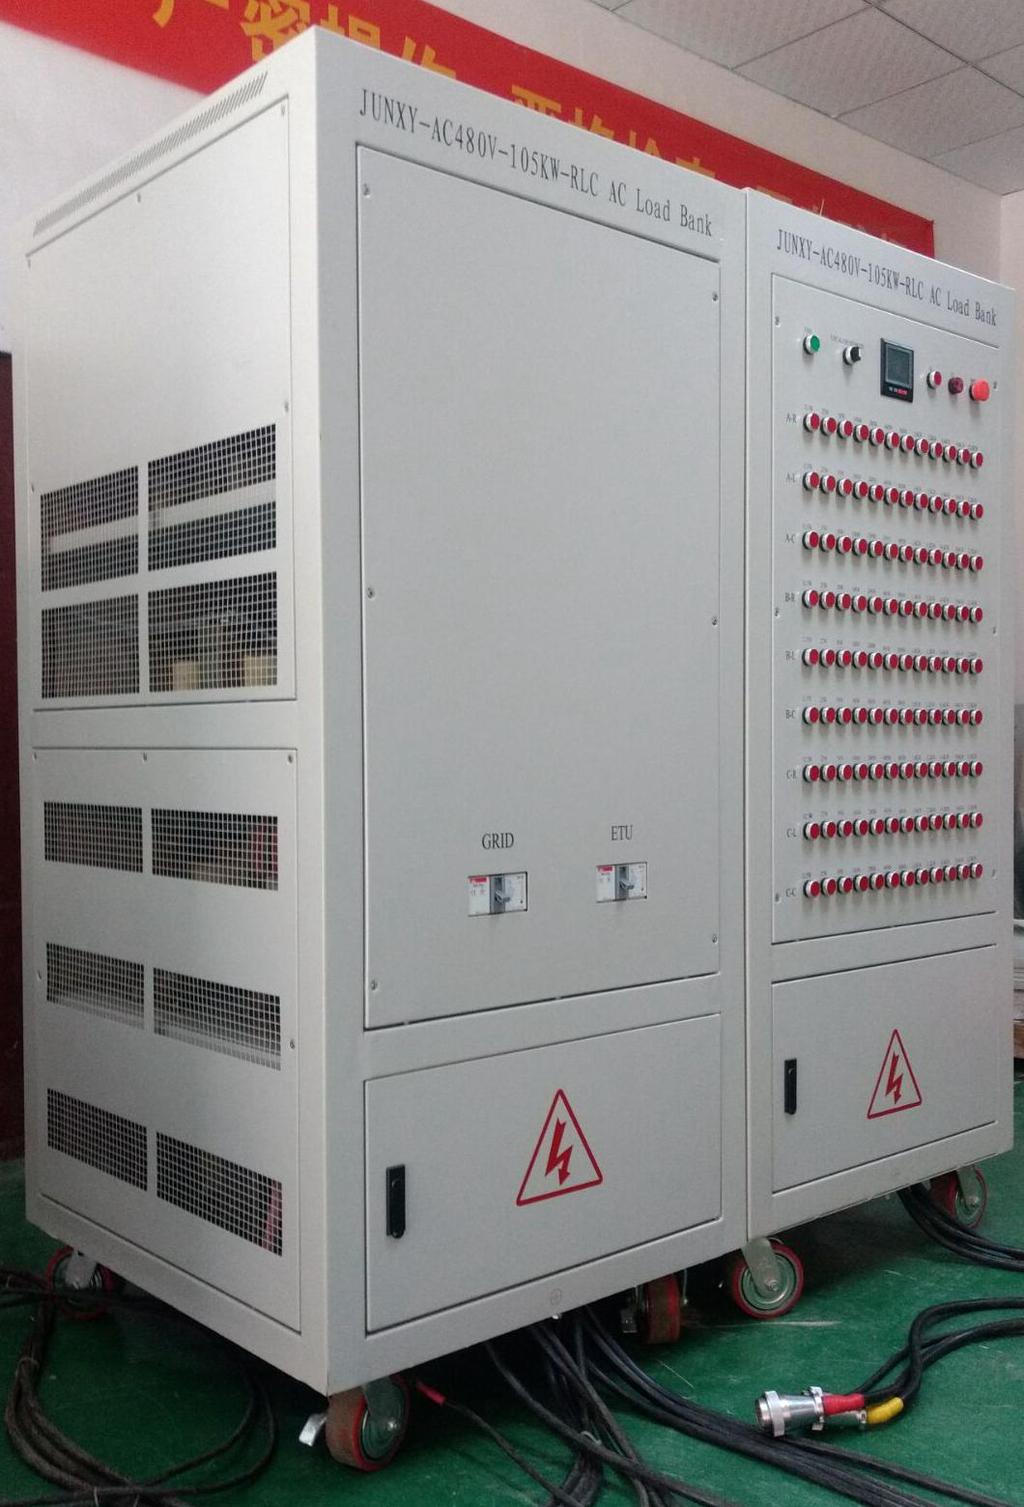 JUNXY Series Resistive & Reactive AC Load Banks It is really critical that your standby power system say UPS(uninterrupted power supply), battery bank, generator, transformers, inverter etc working